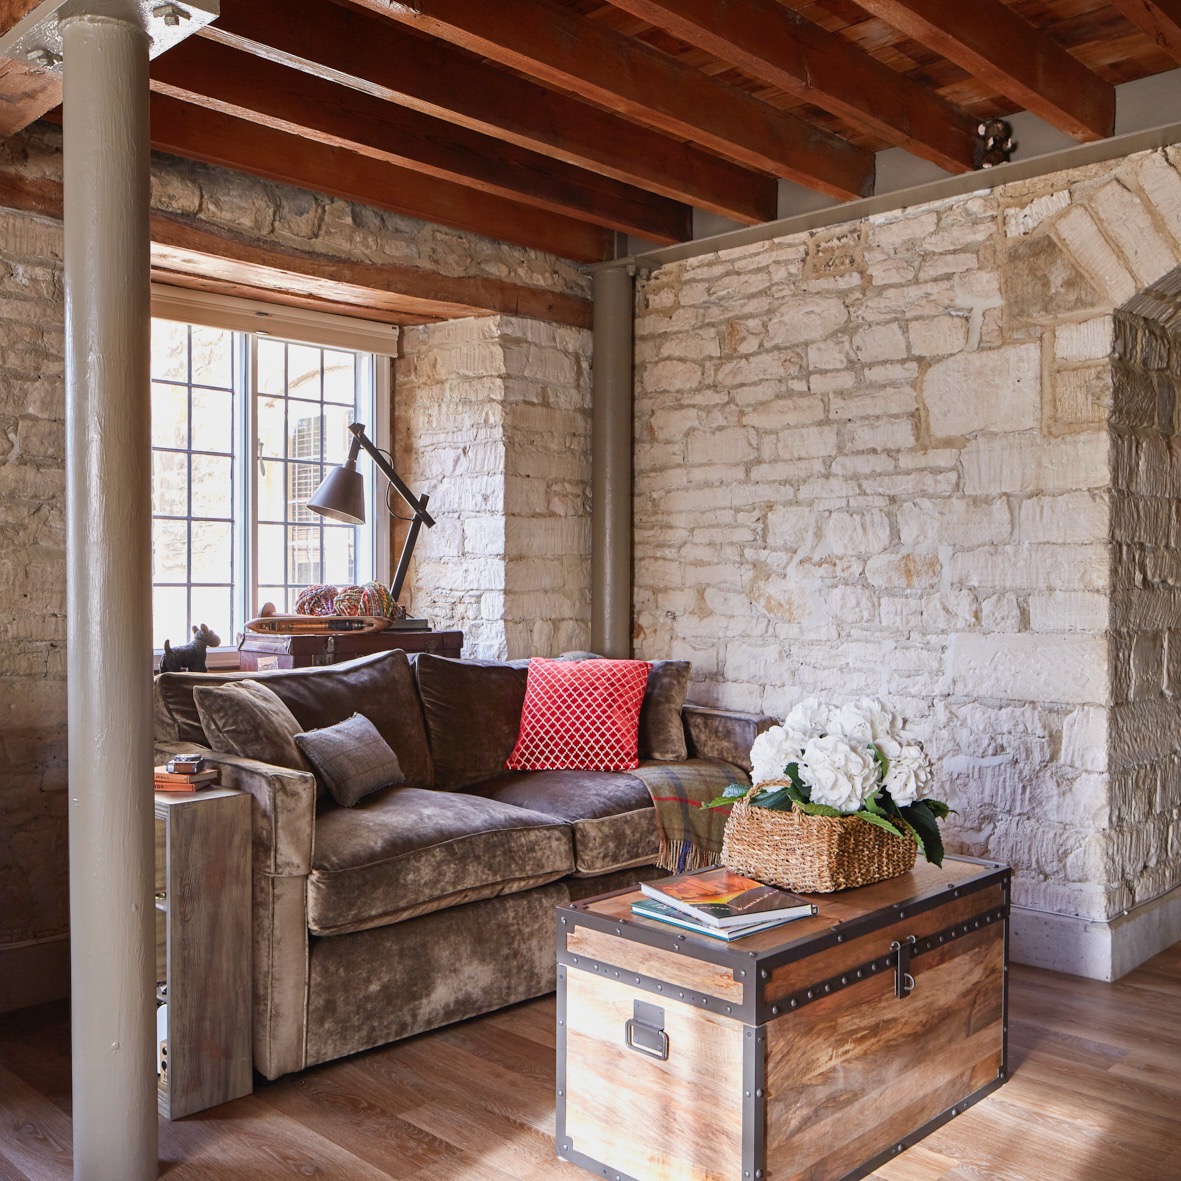 !0 Interior Design Tips to make your Cotswolds Home Stylish, Cosy and Inviting